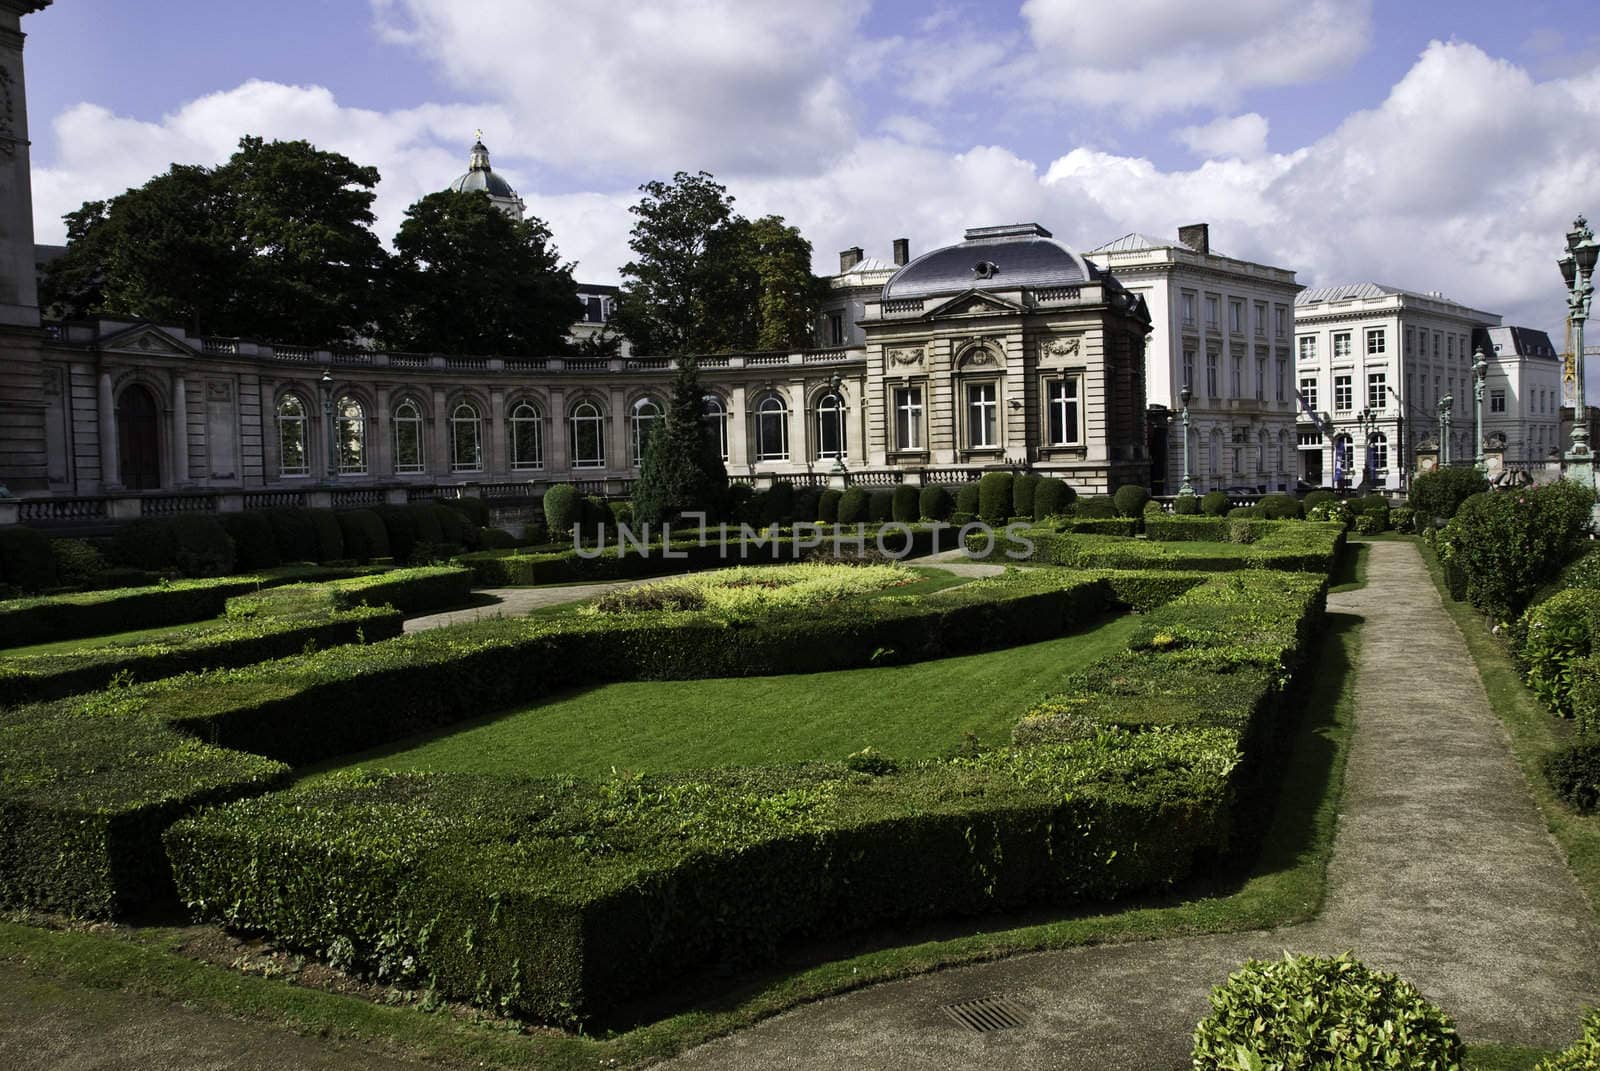 The Royal Palace in the centre of Brussels, Belgium, is open to the public during the summer months. 